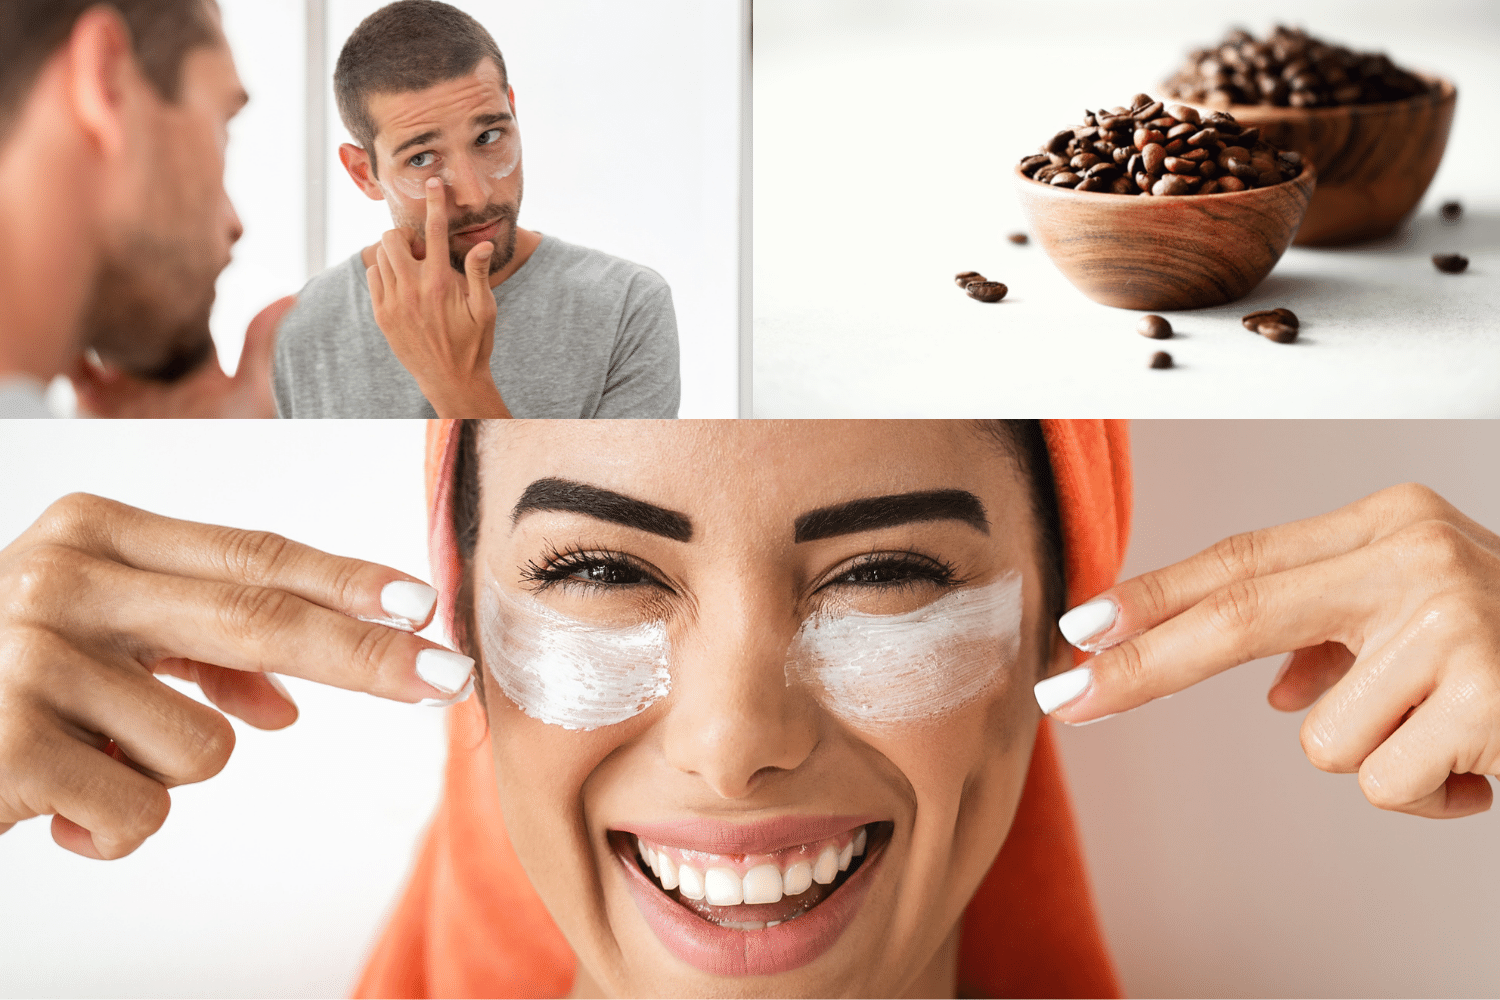 The 6 Best-Rated Caffeinated Eye Creams on Amazon - The Only List You Need!